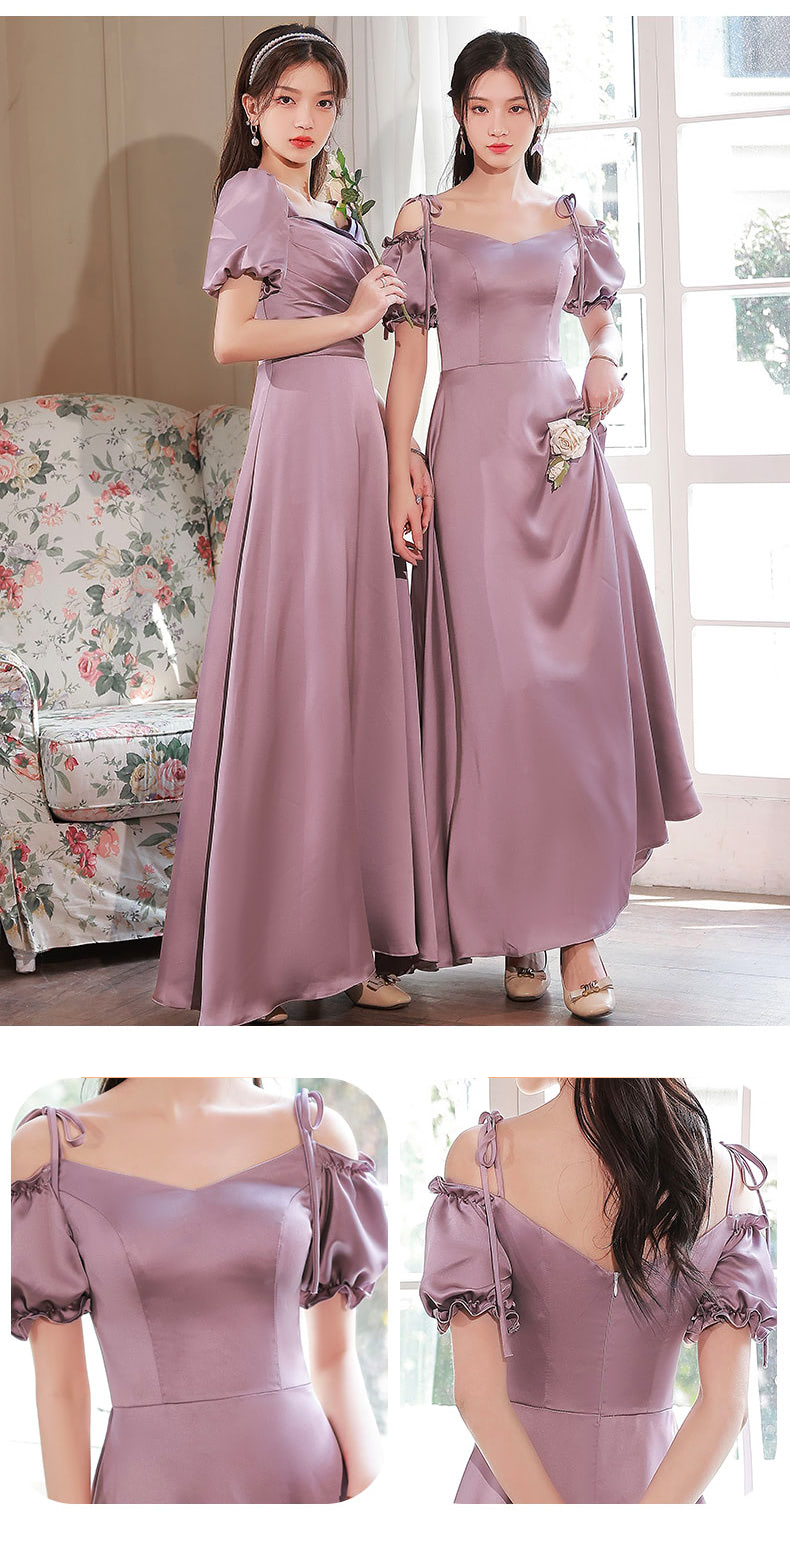 Sweet-Sexy-Purple-Satin-Bridesmaid-Long-Dress-Party-Casual-Ball-Gown19.jpg